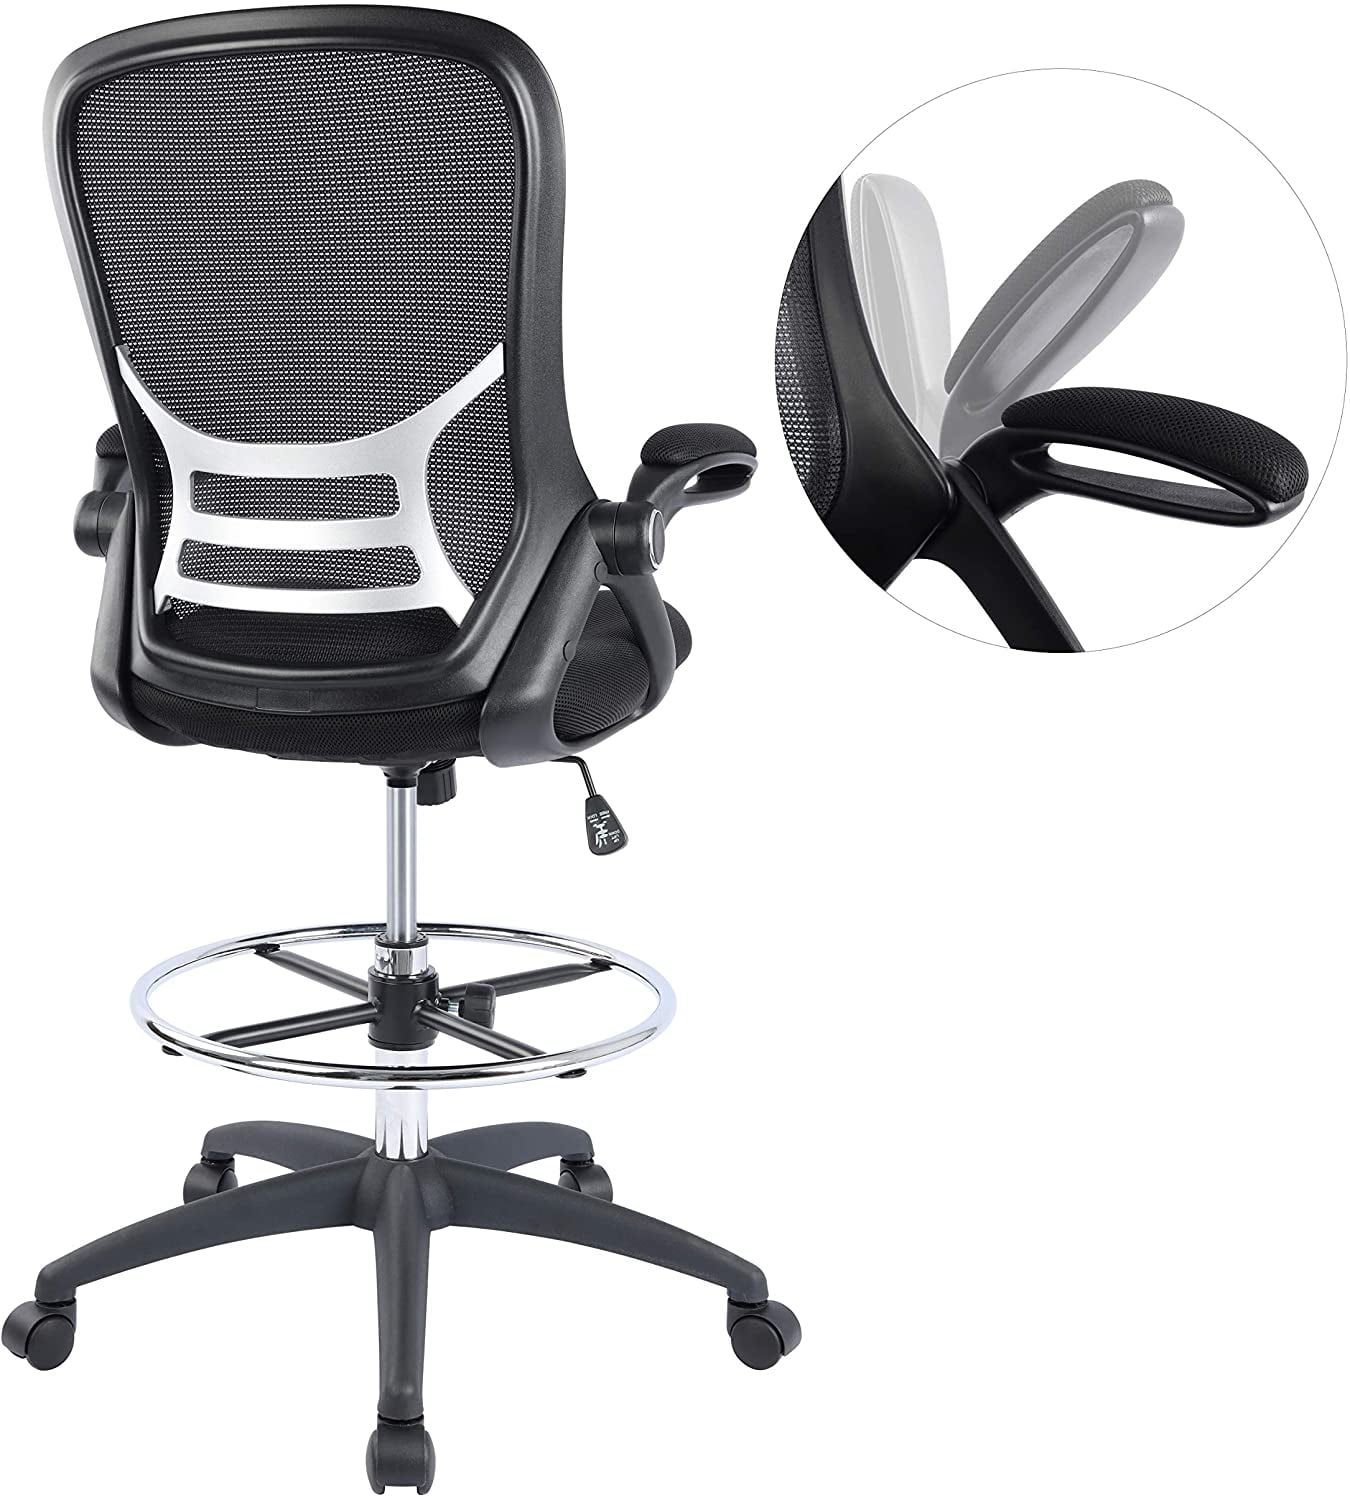 Drafting Chair Tall Office Chair Mid-Back Mesh Ergonomic Computer Chair High Adjustable Standing Desk Chair with Lumbar Support Adjustable Foot Ring and Flip-Up Arms,Black